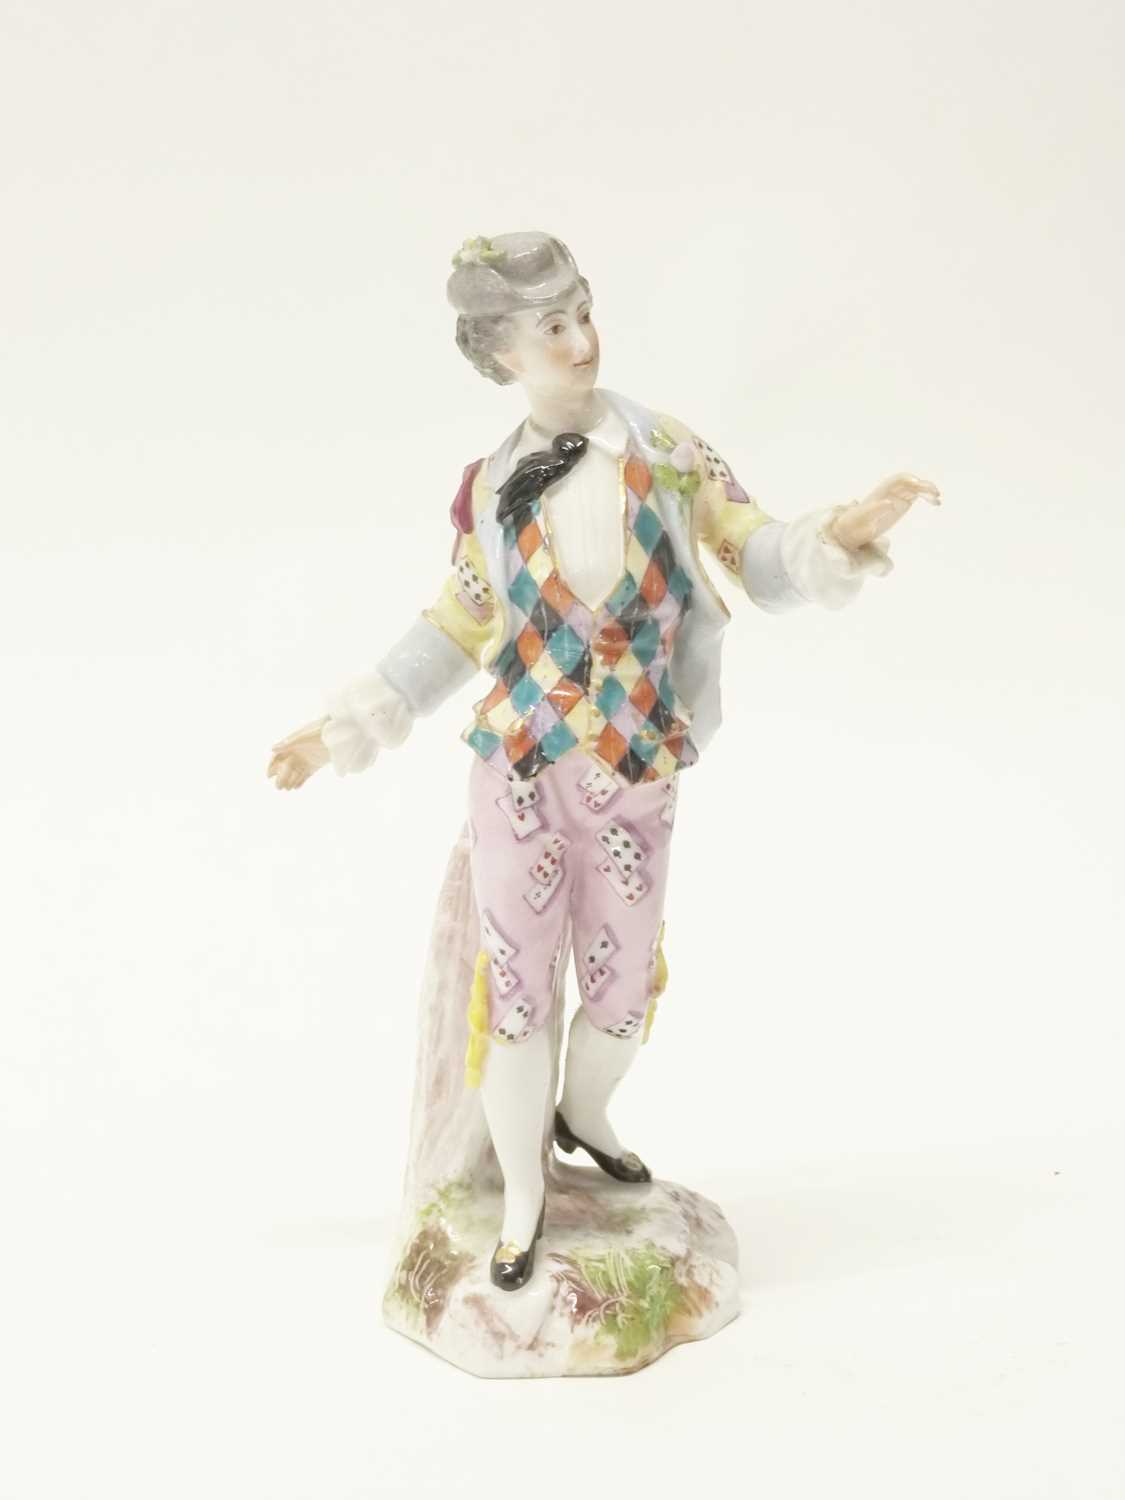 A continental porcelain figure of a gentleman depicting harlequin, cross swords and E mark in blue